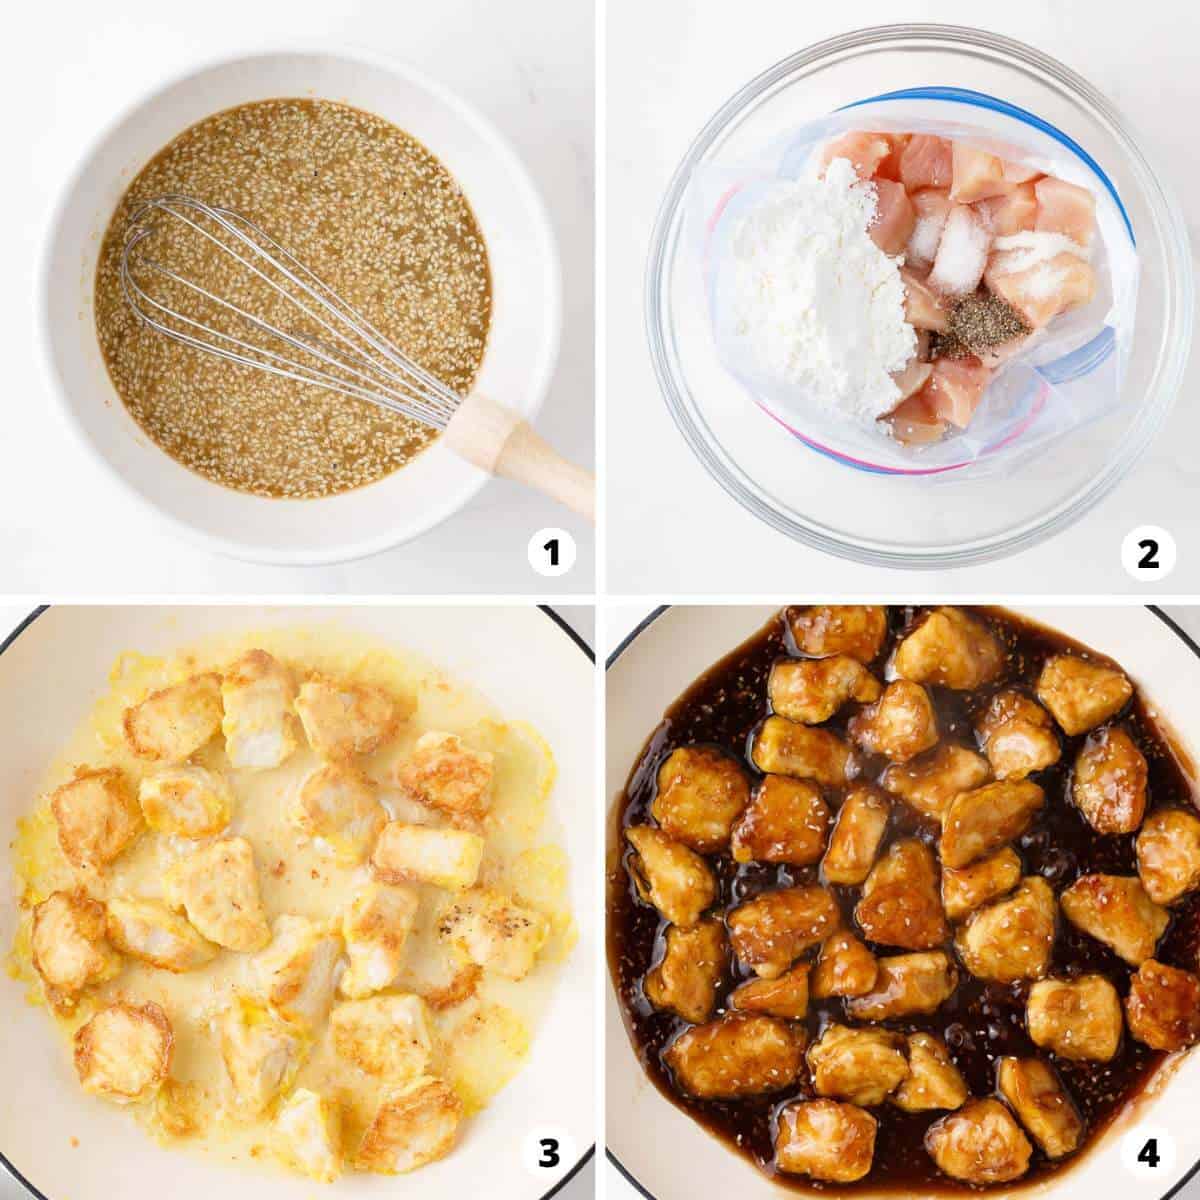 Showing how to make honey sesame chicken in a 4 step collage.